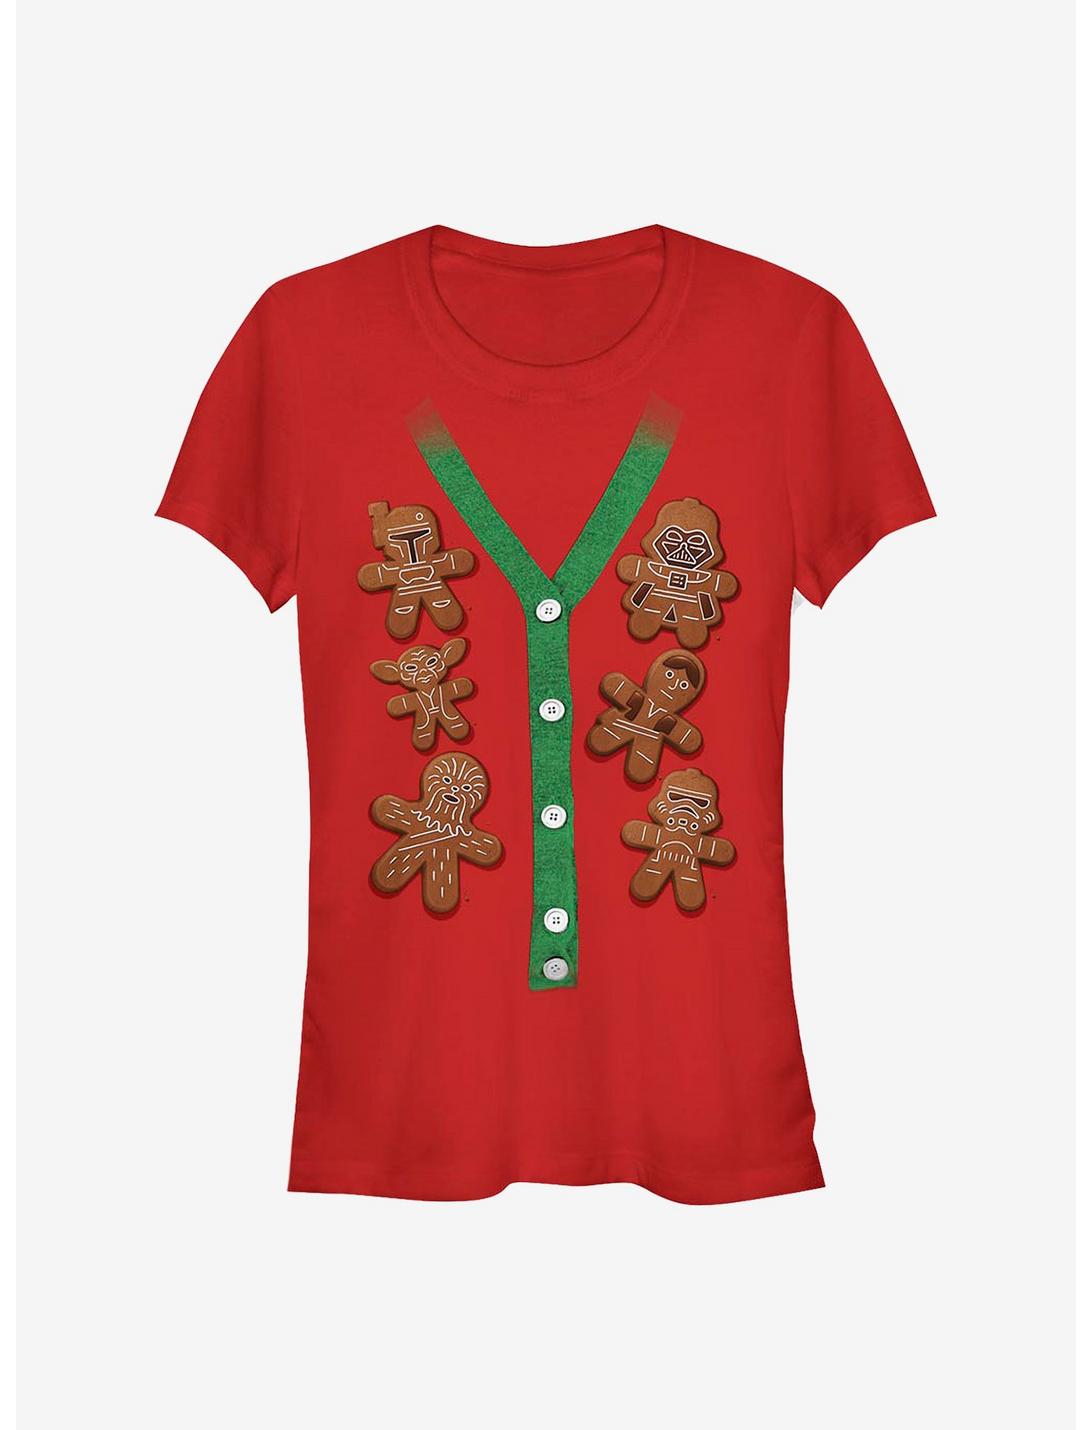 Star Wars Christmas Vest Holiday Cookies Girls T-Shirt, RED, hi-res